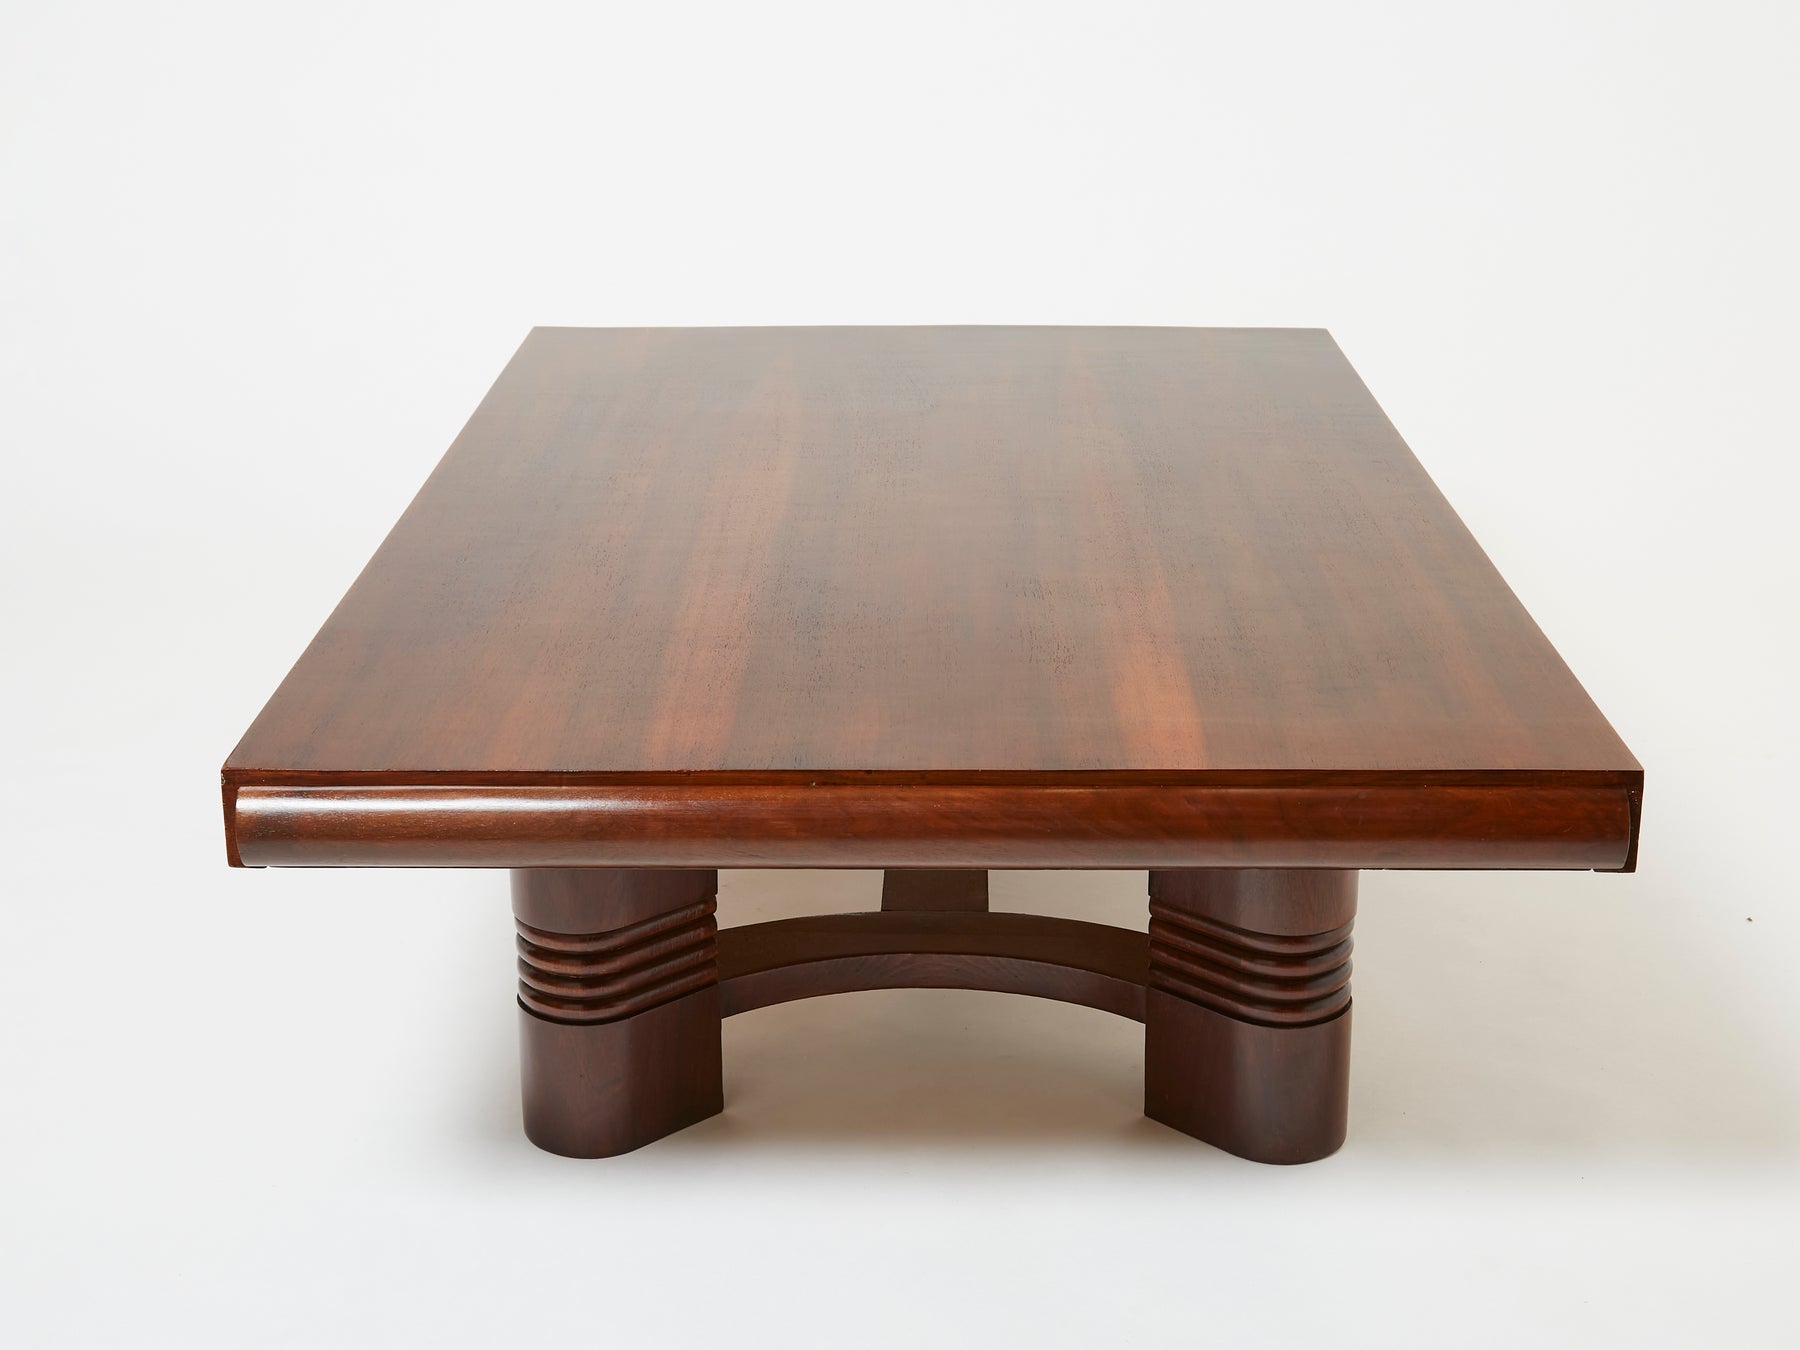 Charles Dudouyt large Modernist walnut coffee table 1940